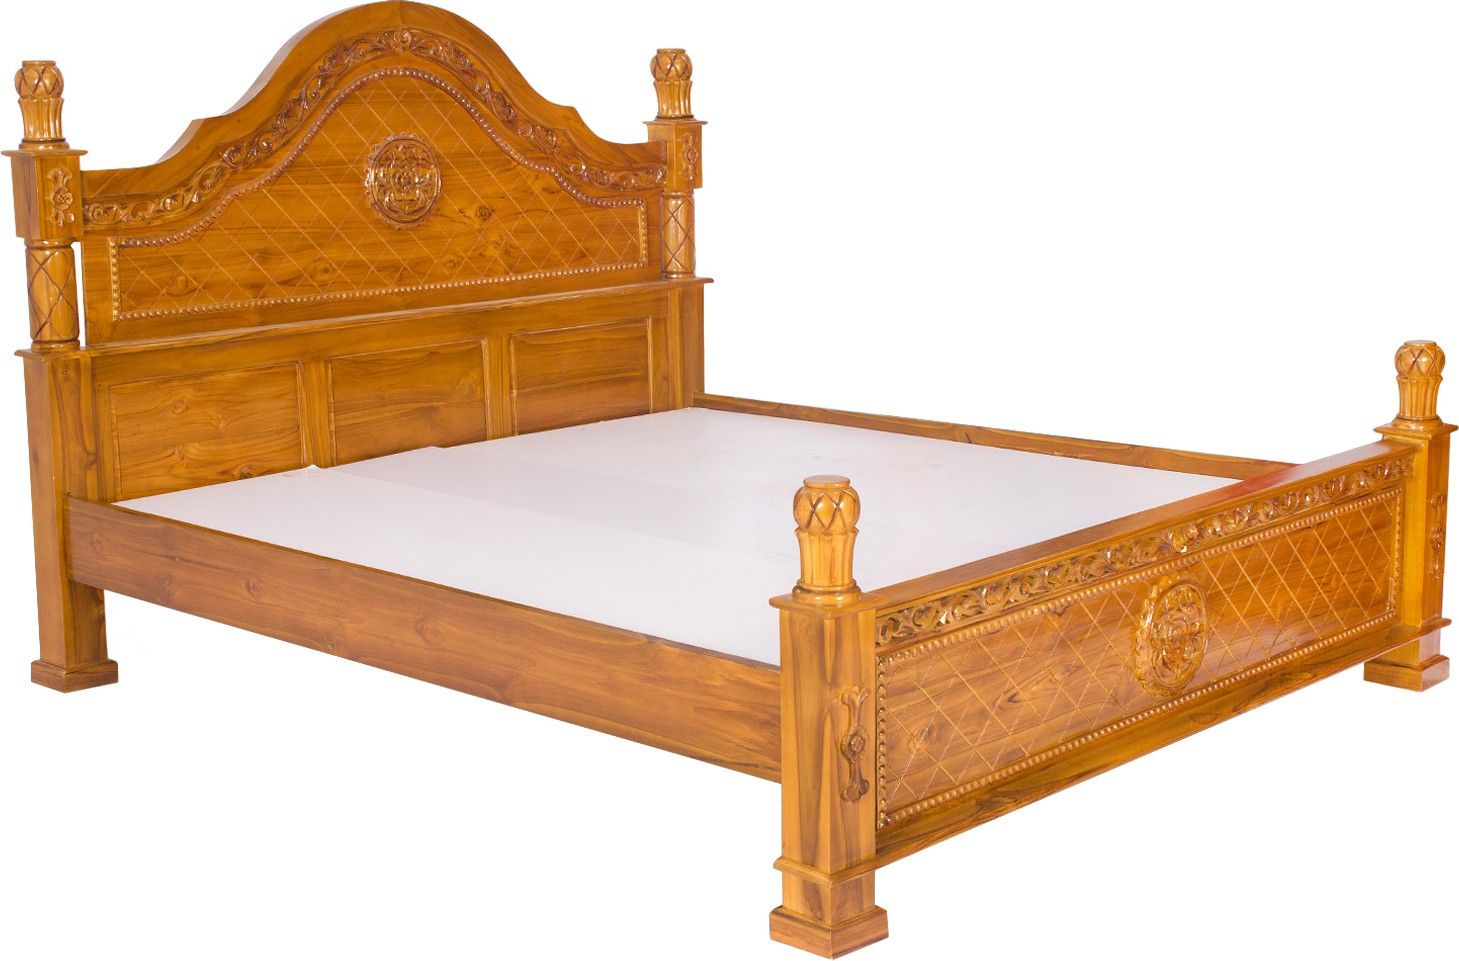 Woodpecker Solid Wood Queen Bed(Finish Color – Teak) Furniture Price Throughout Quinn Teak Sofa Chairs (View 15 of 20)